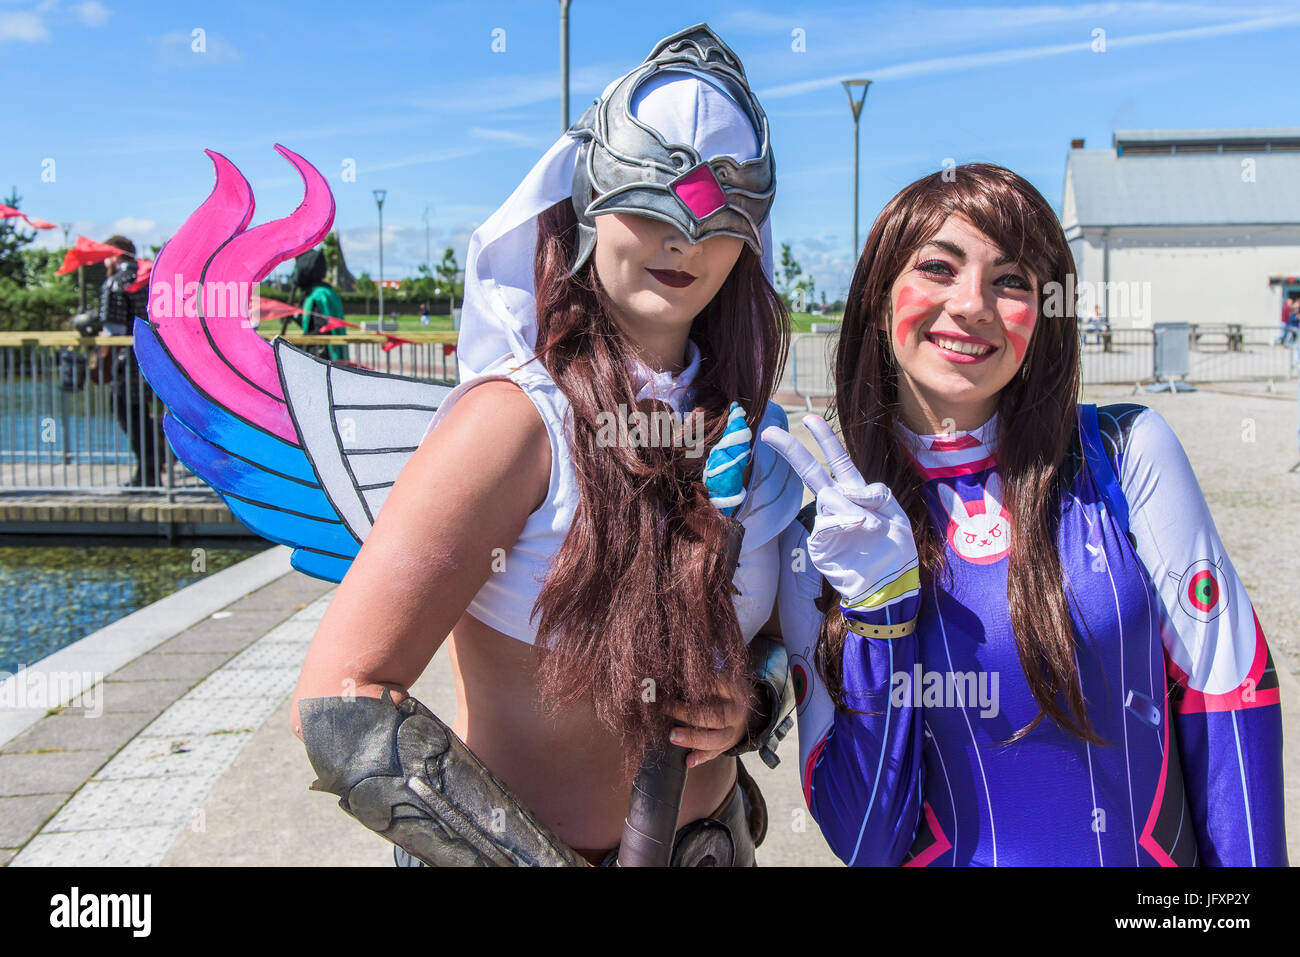 Comic and cosplay fans gather at The Heartlands in Cornwall for Geekfest 3.0 - a celebration of all things sci-fi, comic, film, TV and gaming. Stock Photo